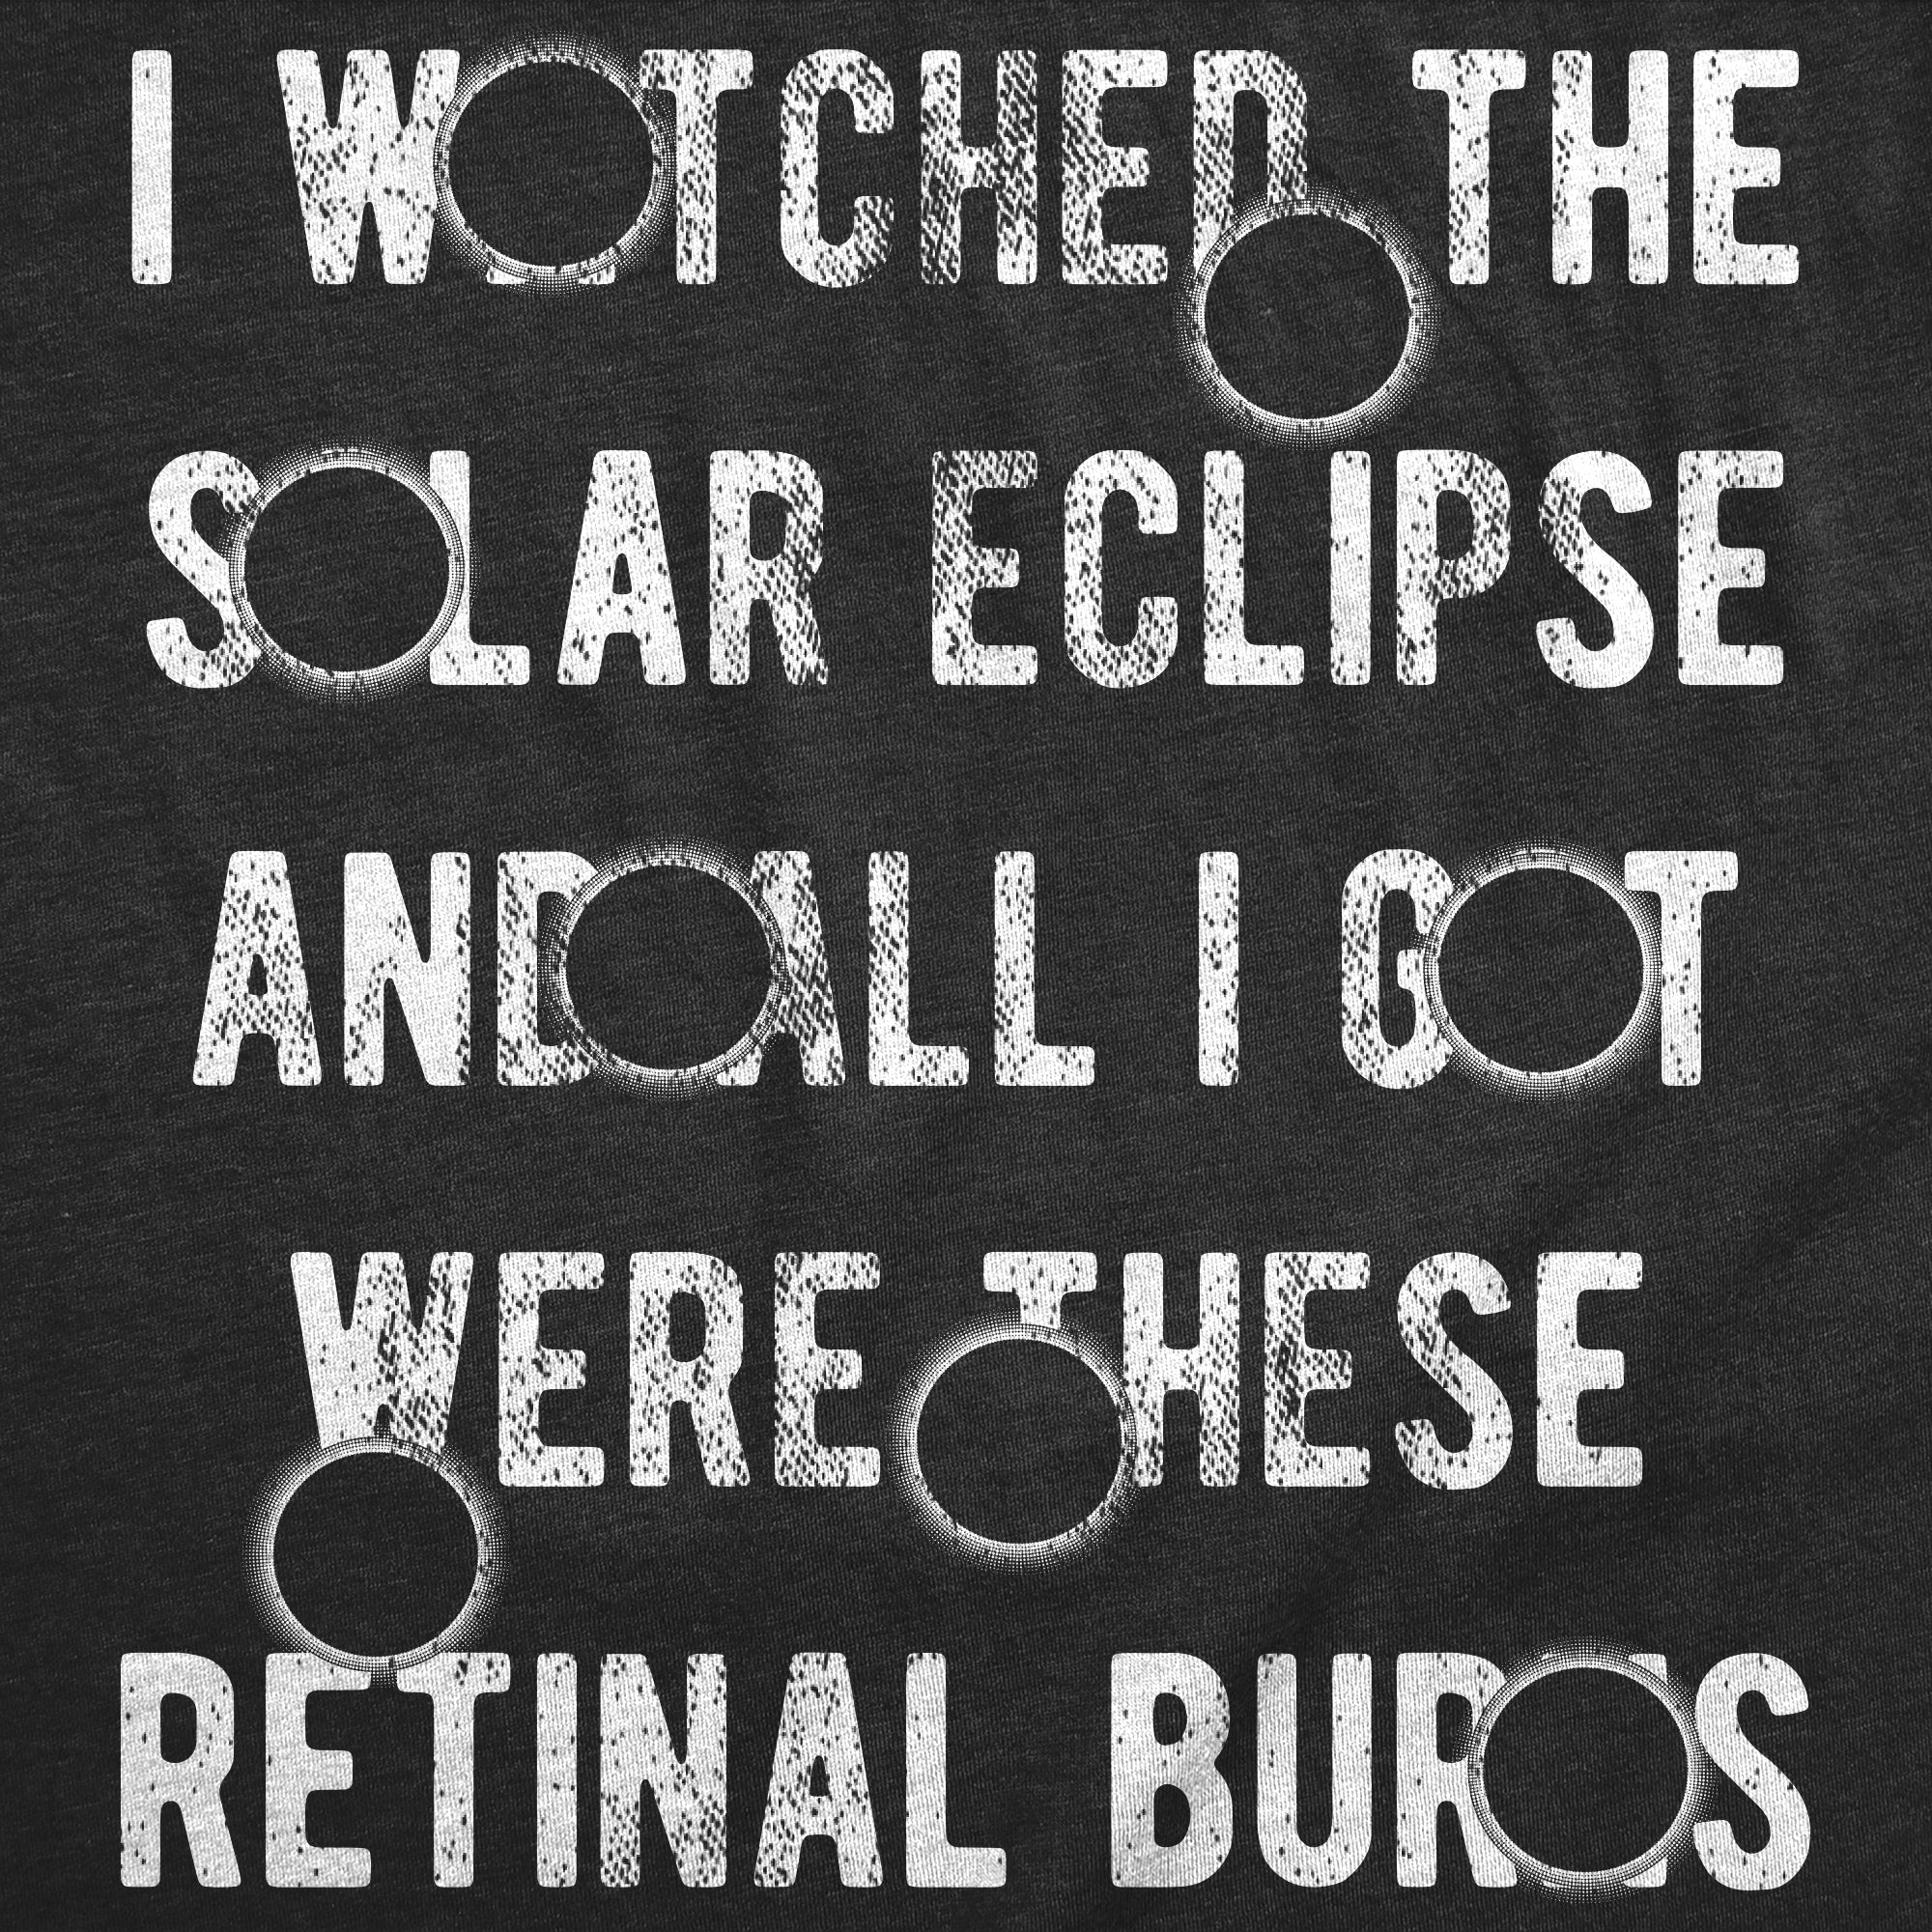 Funny Heather Black - Retinal Burns I Watched The Solar Eclipse And All I Got Were These Retinal Burns Mens T Shirt Nerdy sarcastic Tee